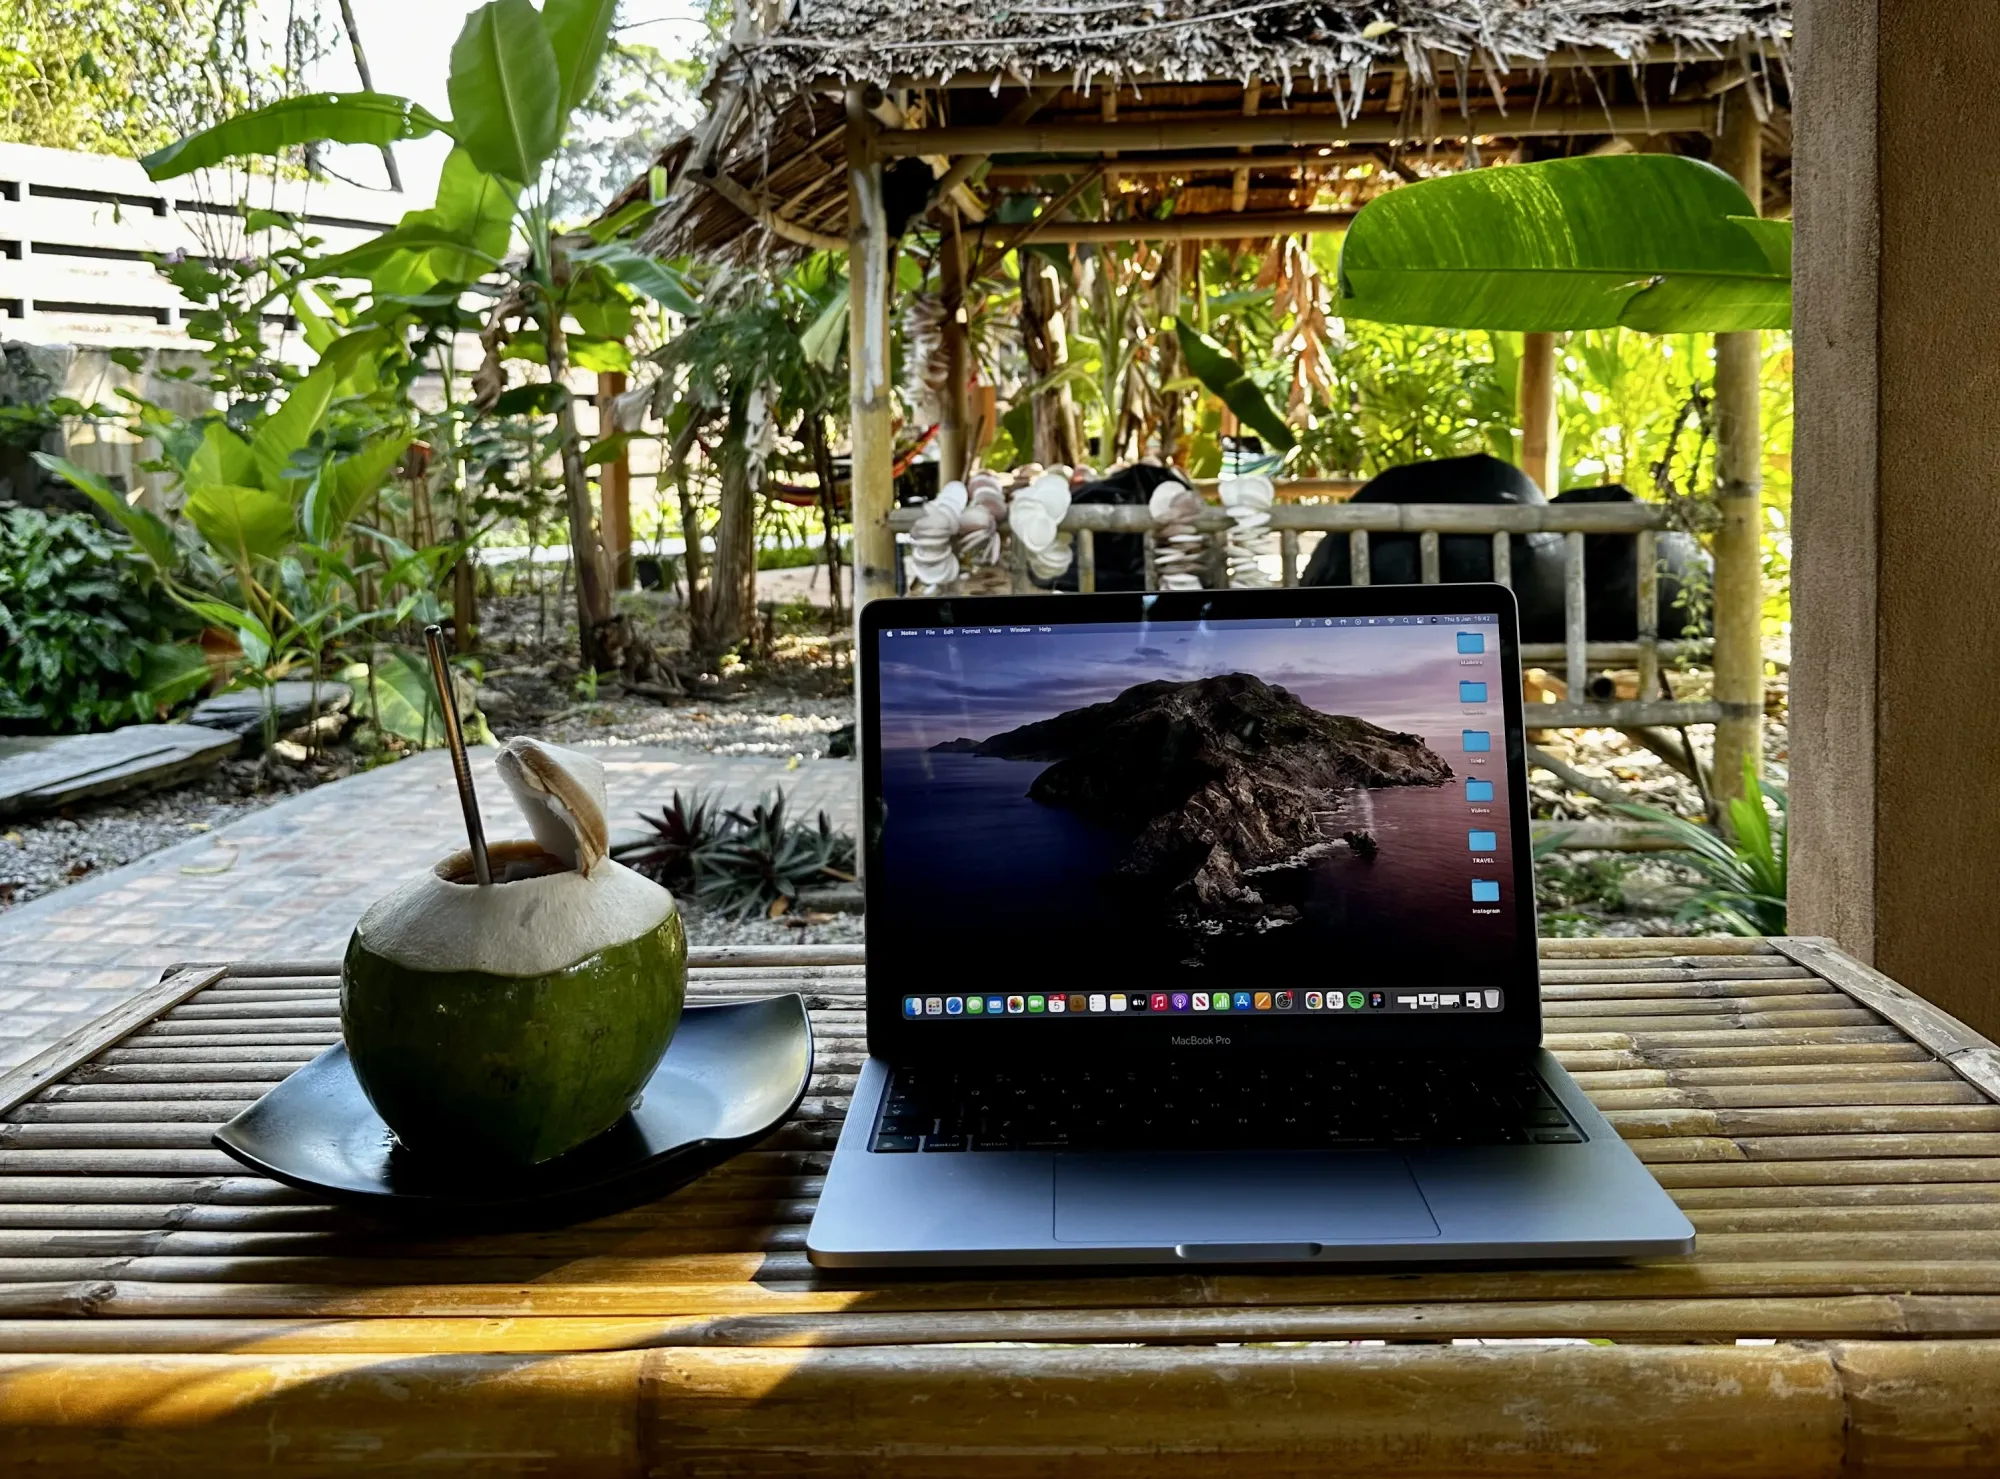 Image of a laptop next to a coconut in a coworking space (Kohub) on Koh Lanta, Thailand